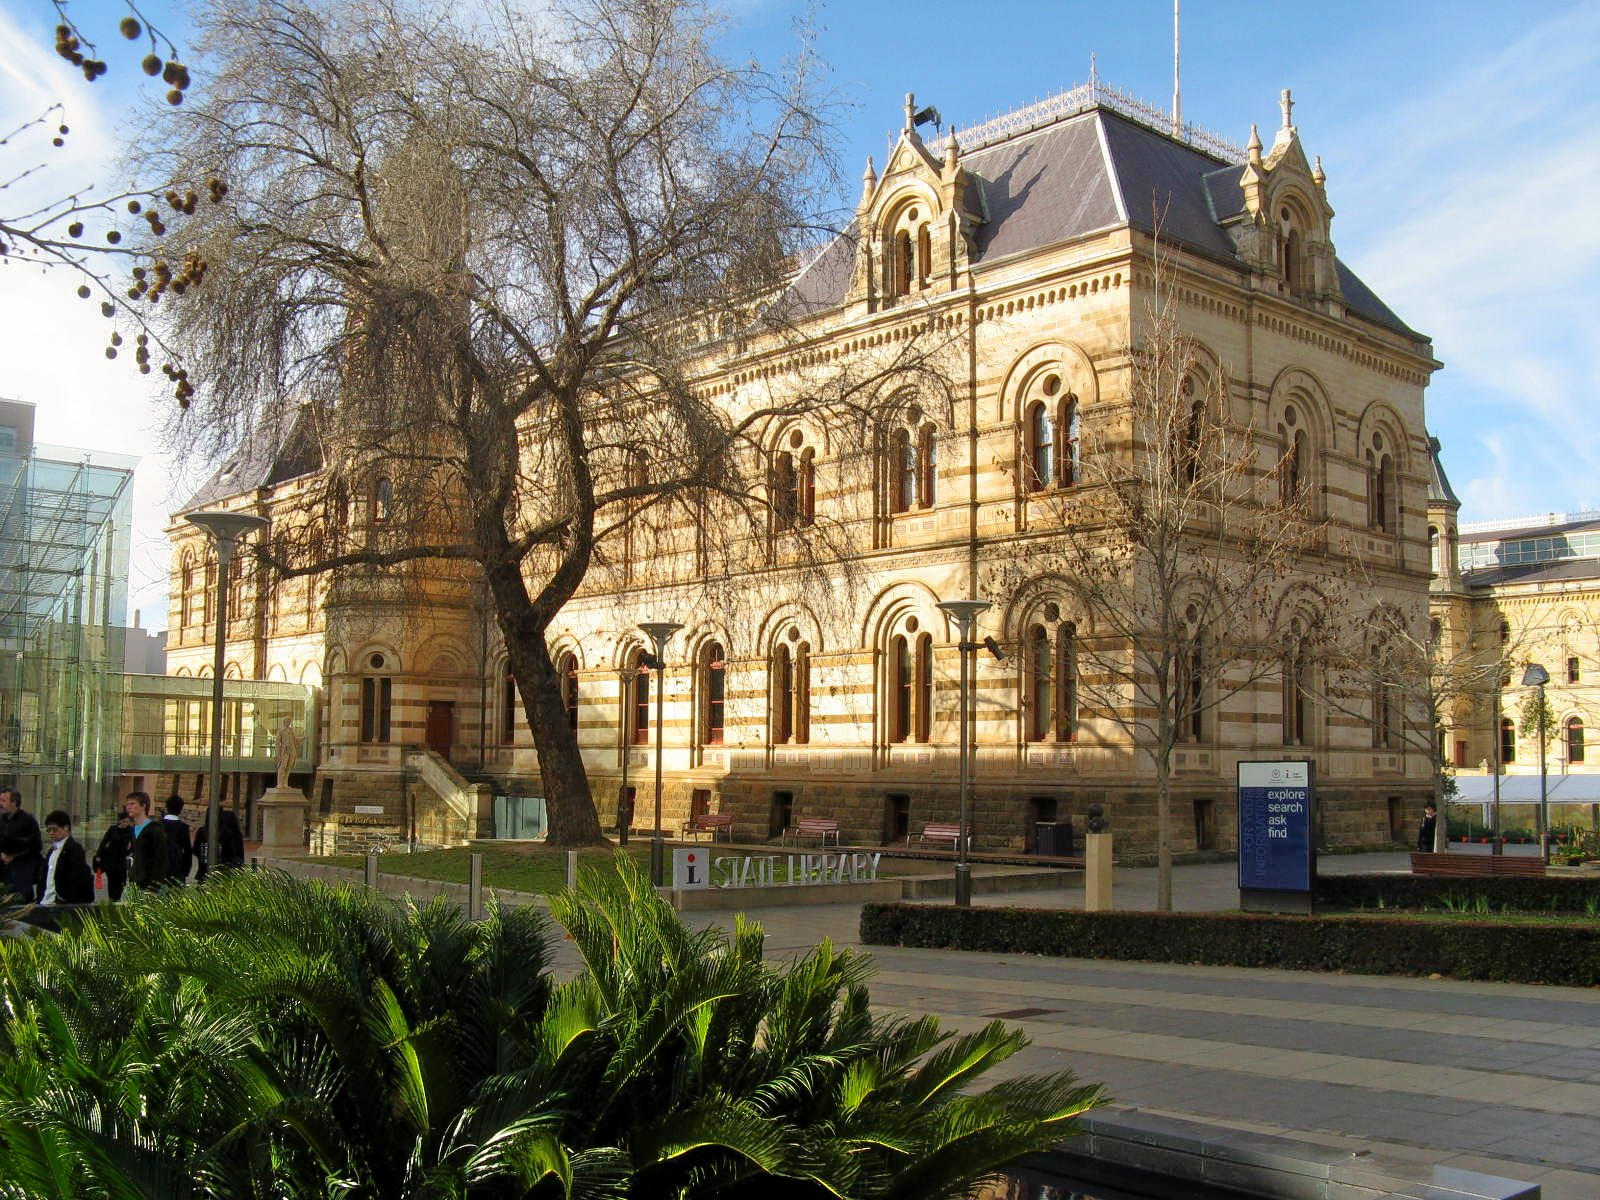 State Library Of South Australia Overview